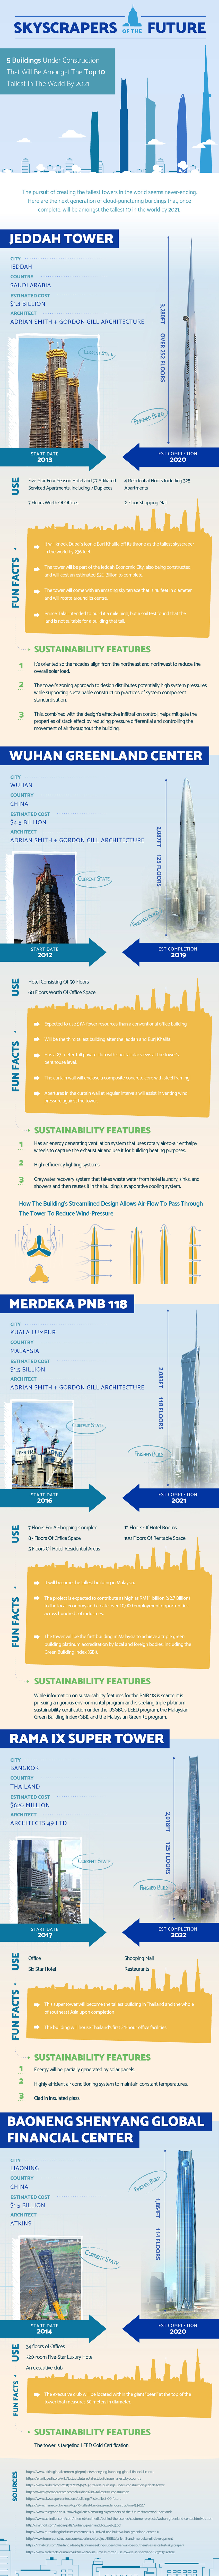  Skyscrapers Of The Future by RubberBond